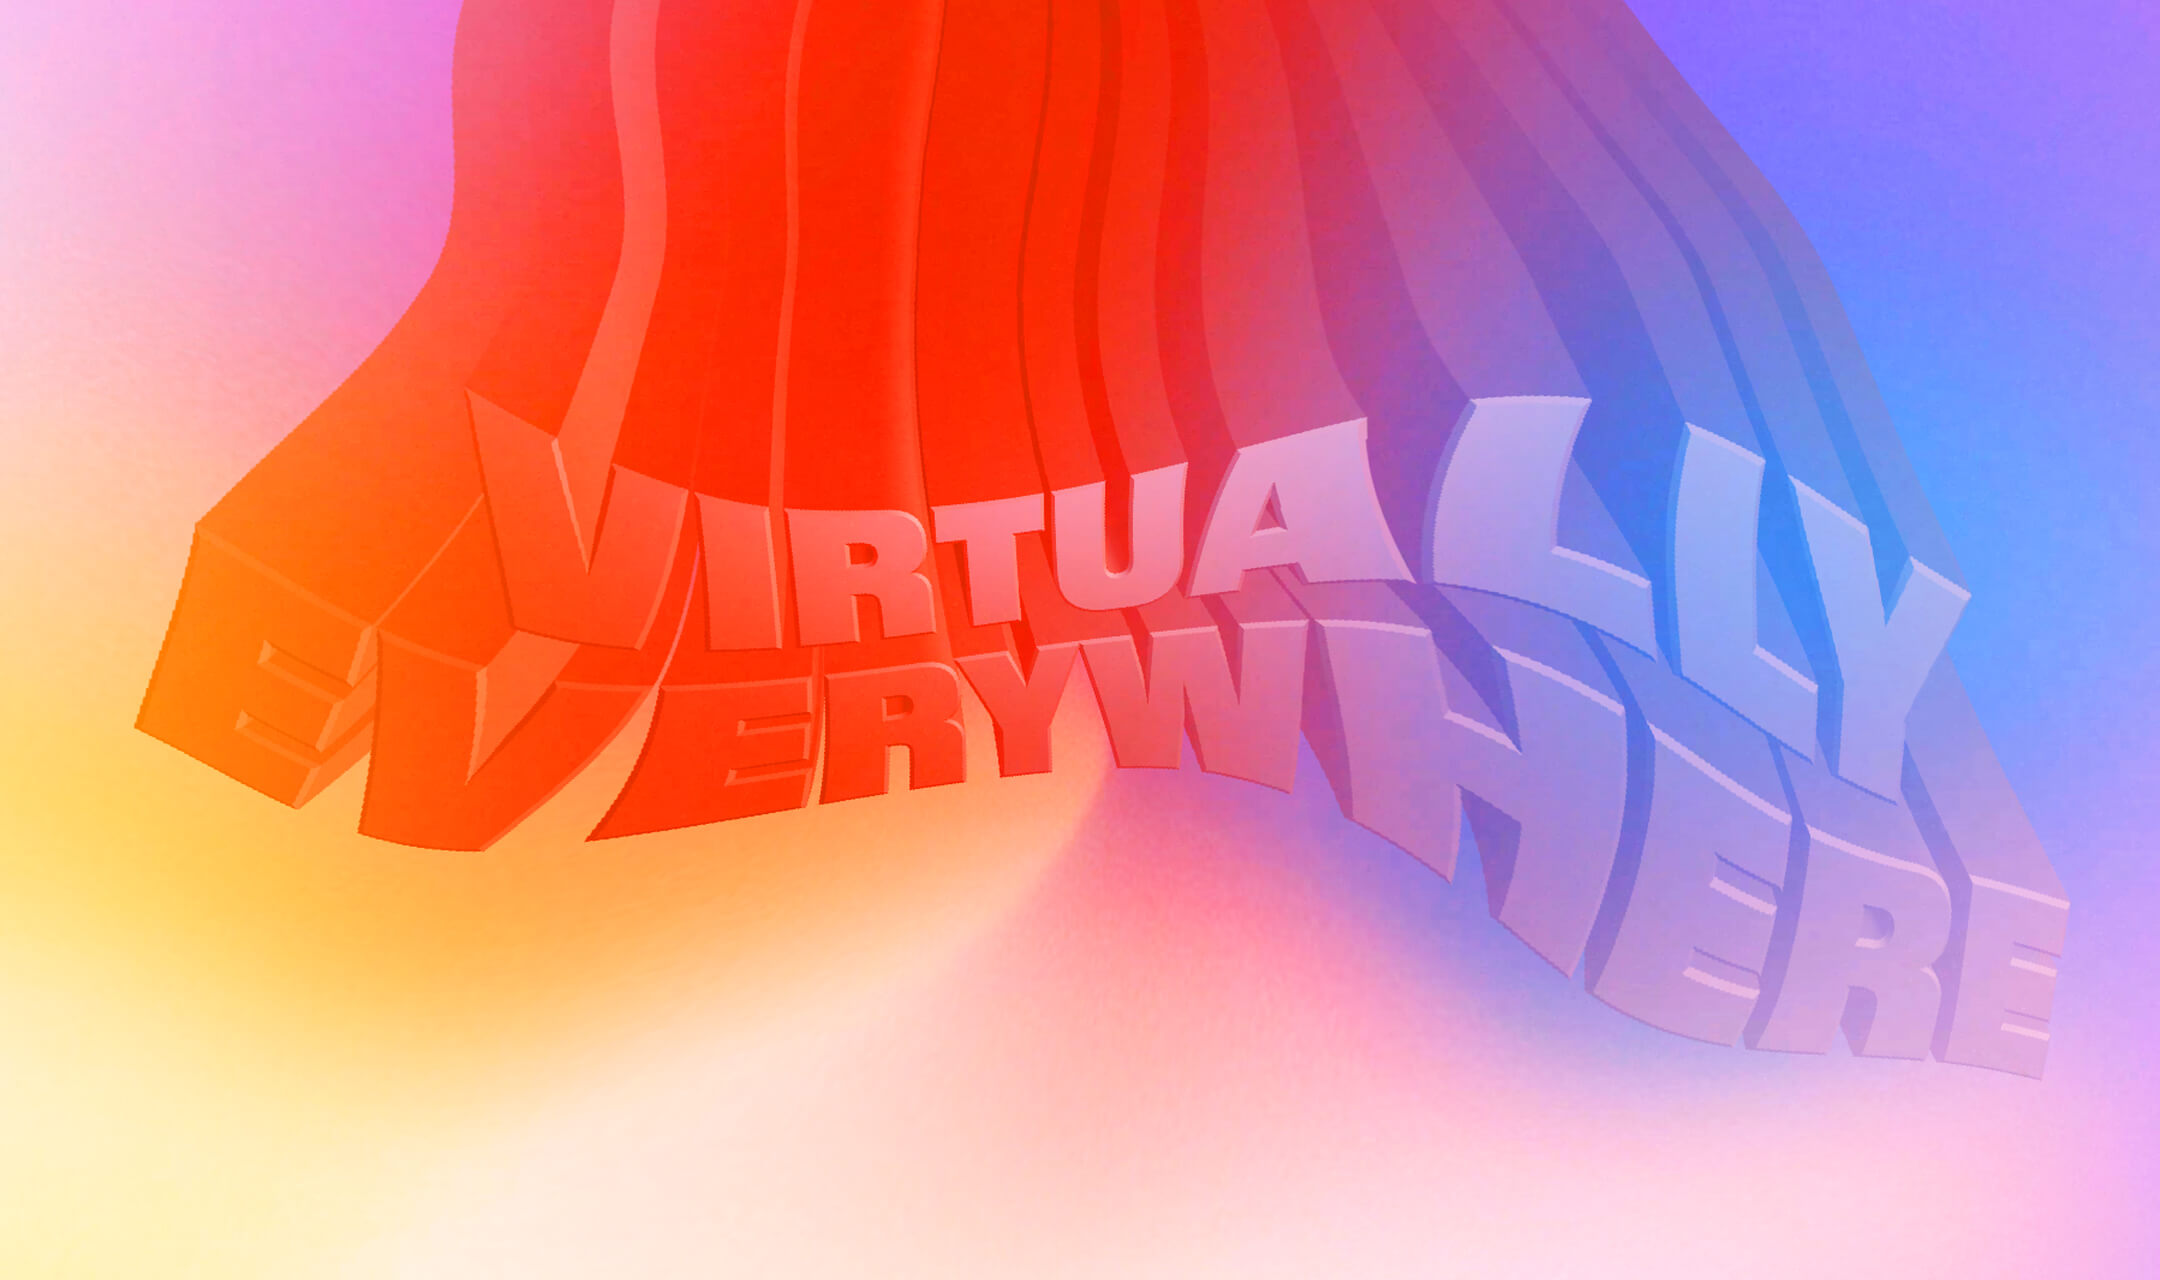 Virtually everywhere: place and design in the Metaverse